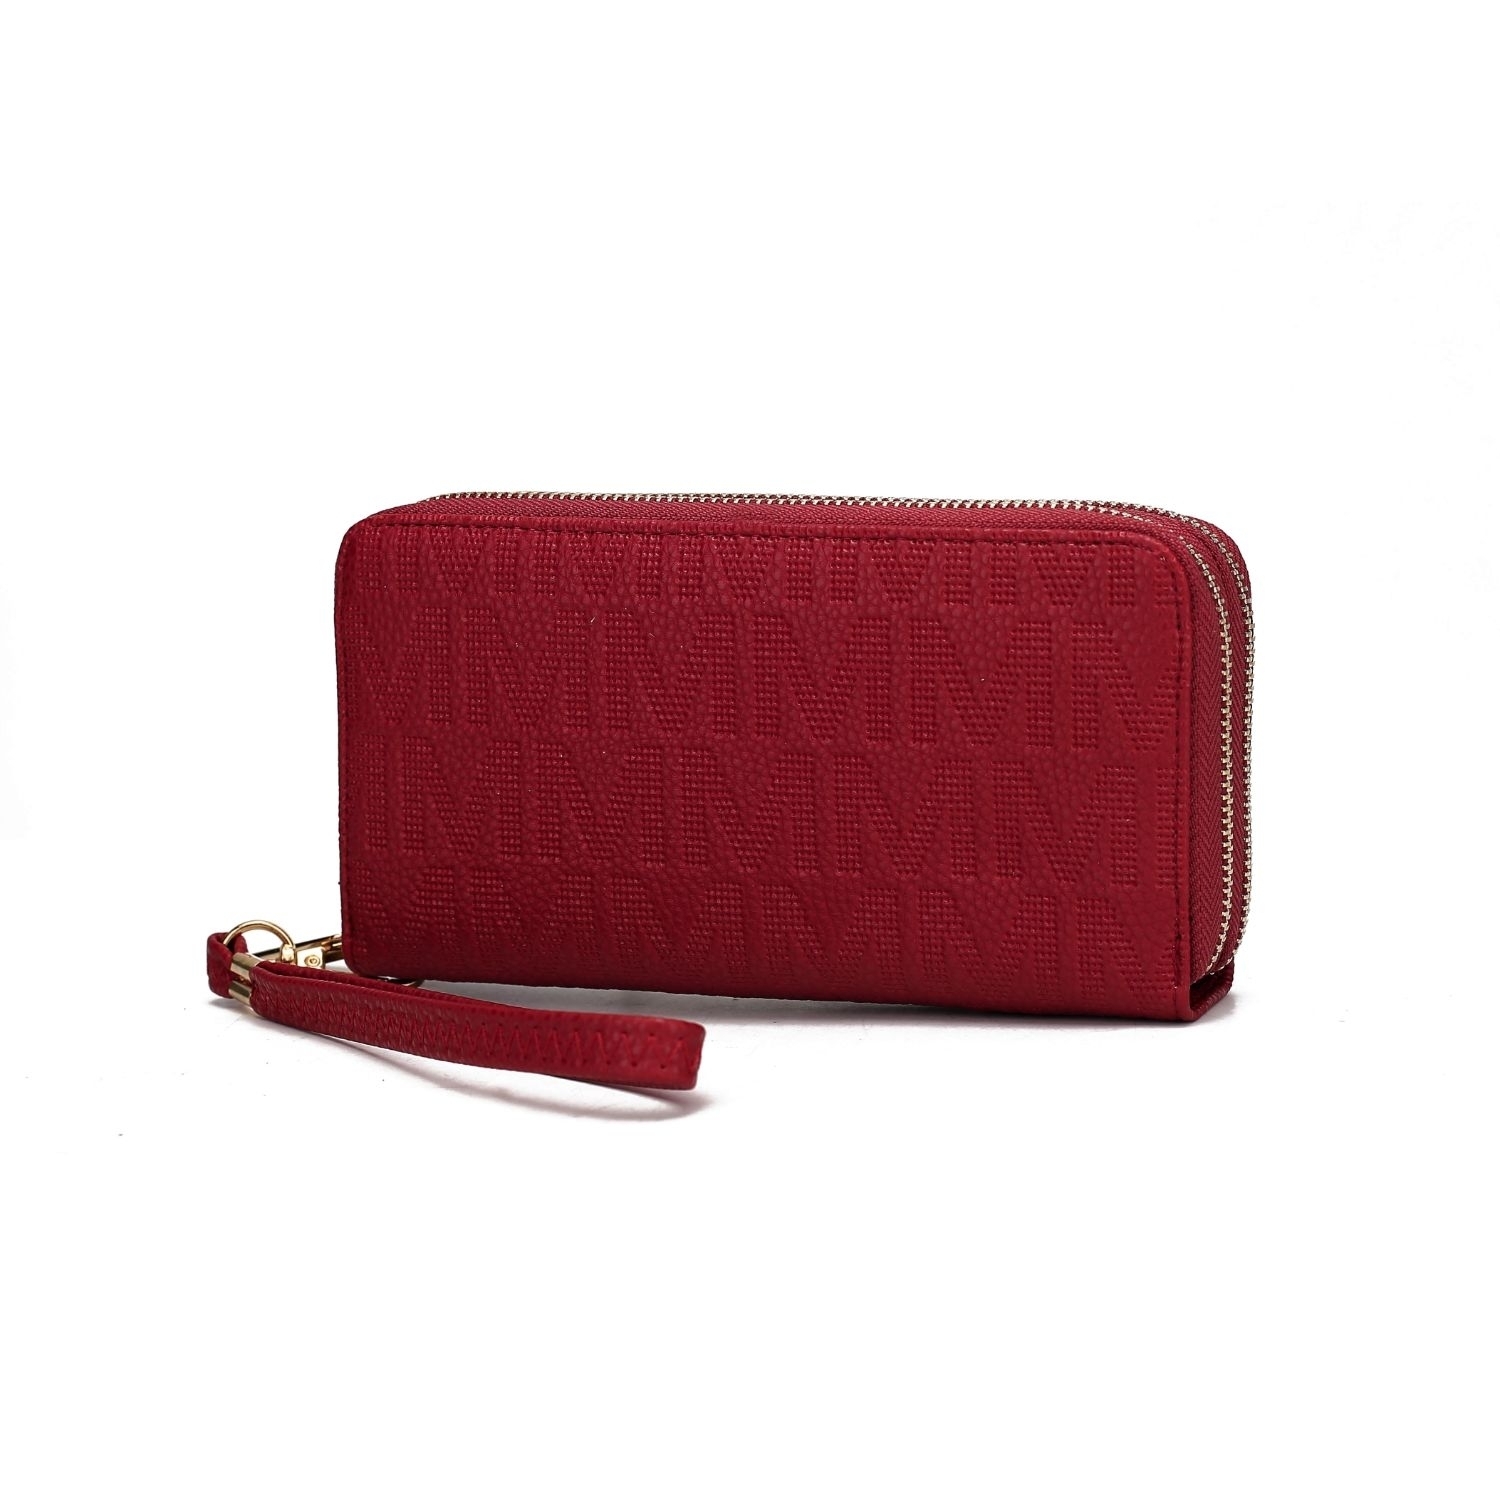 MKF Collection Lisbette Embossed M Signature Wallet By Mia K. Handbag - Red